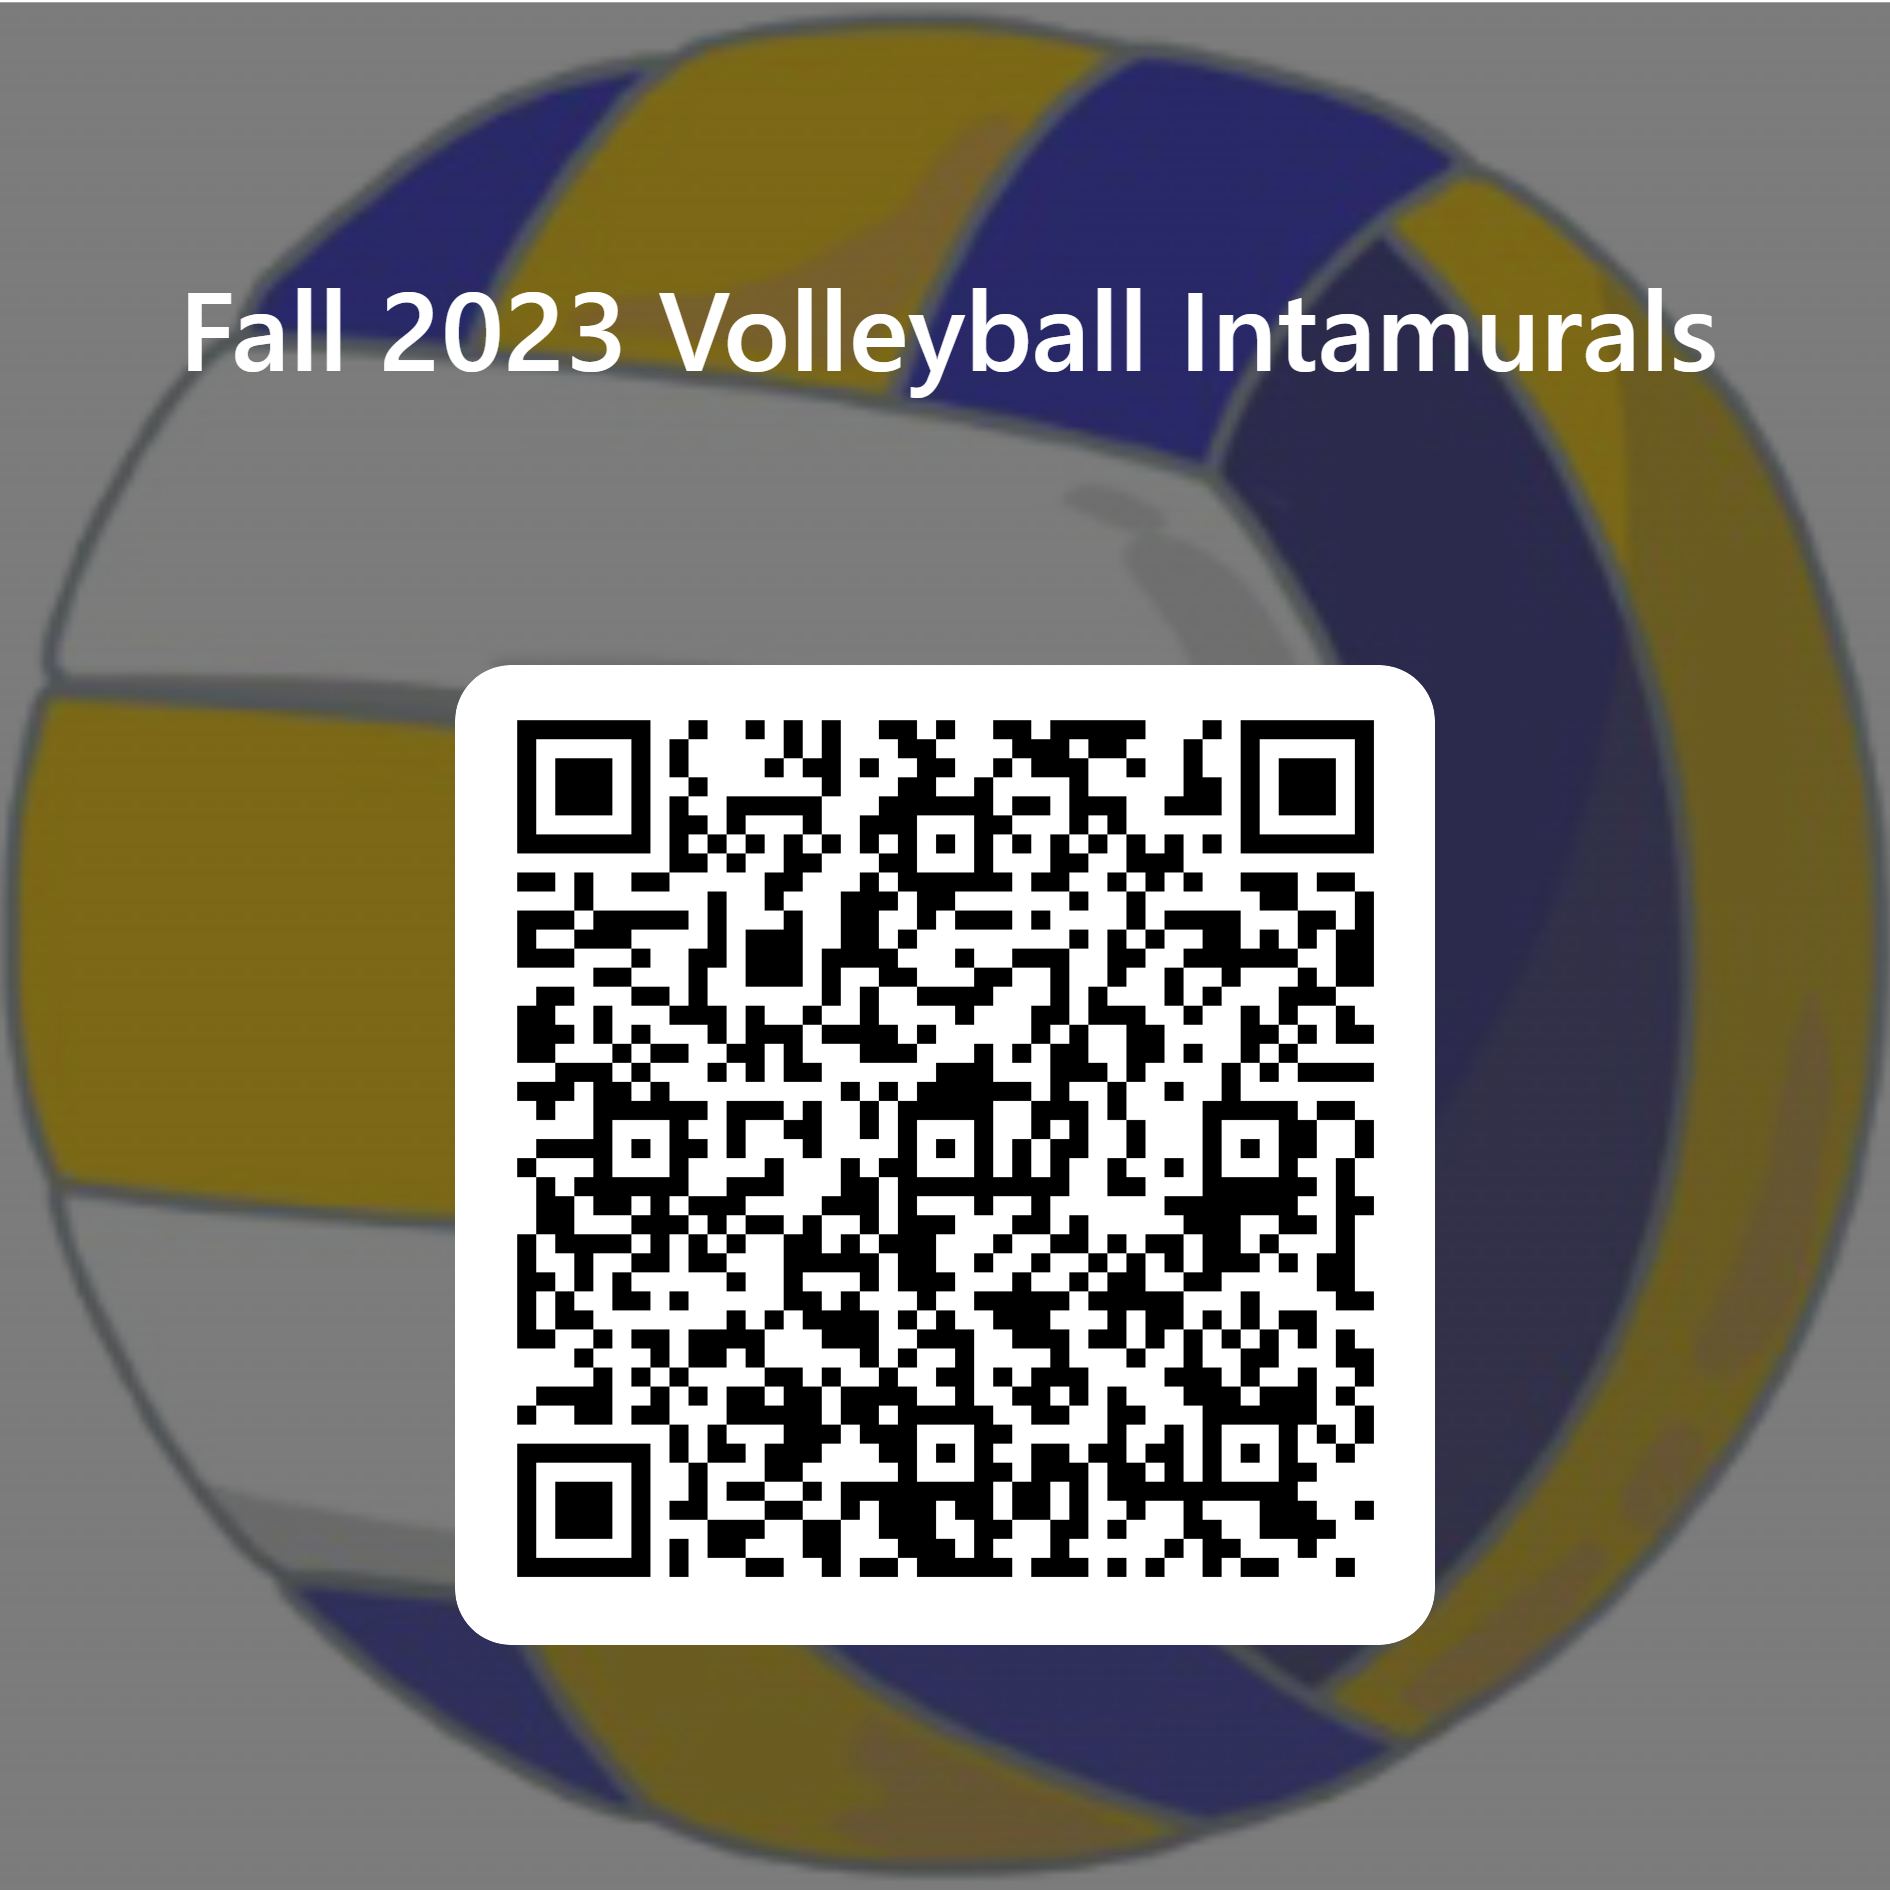 qrcode-for-fall-2023-volleyball-intamurals.png